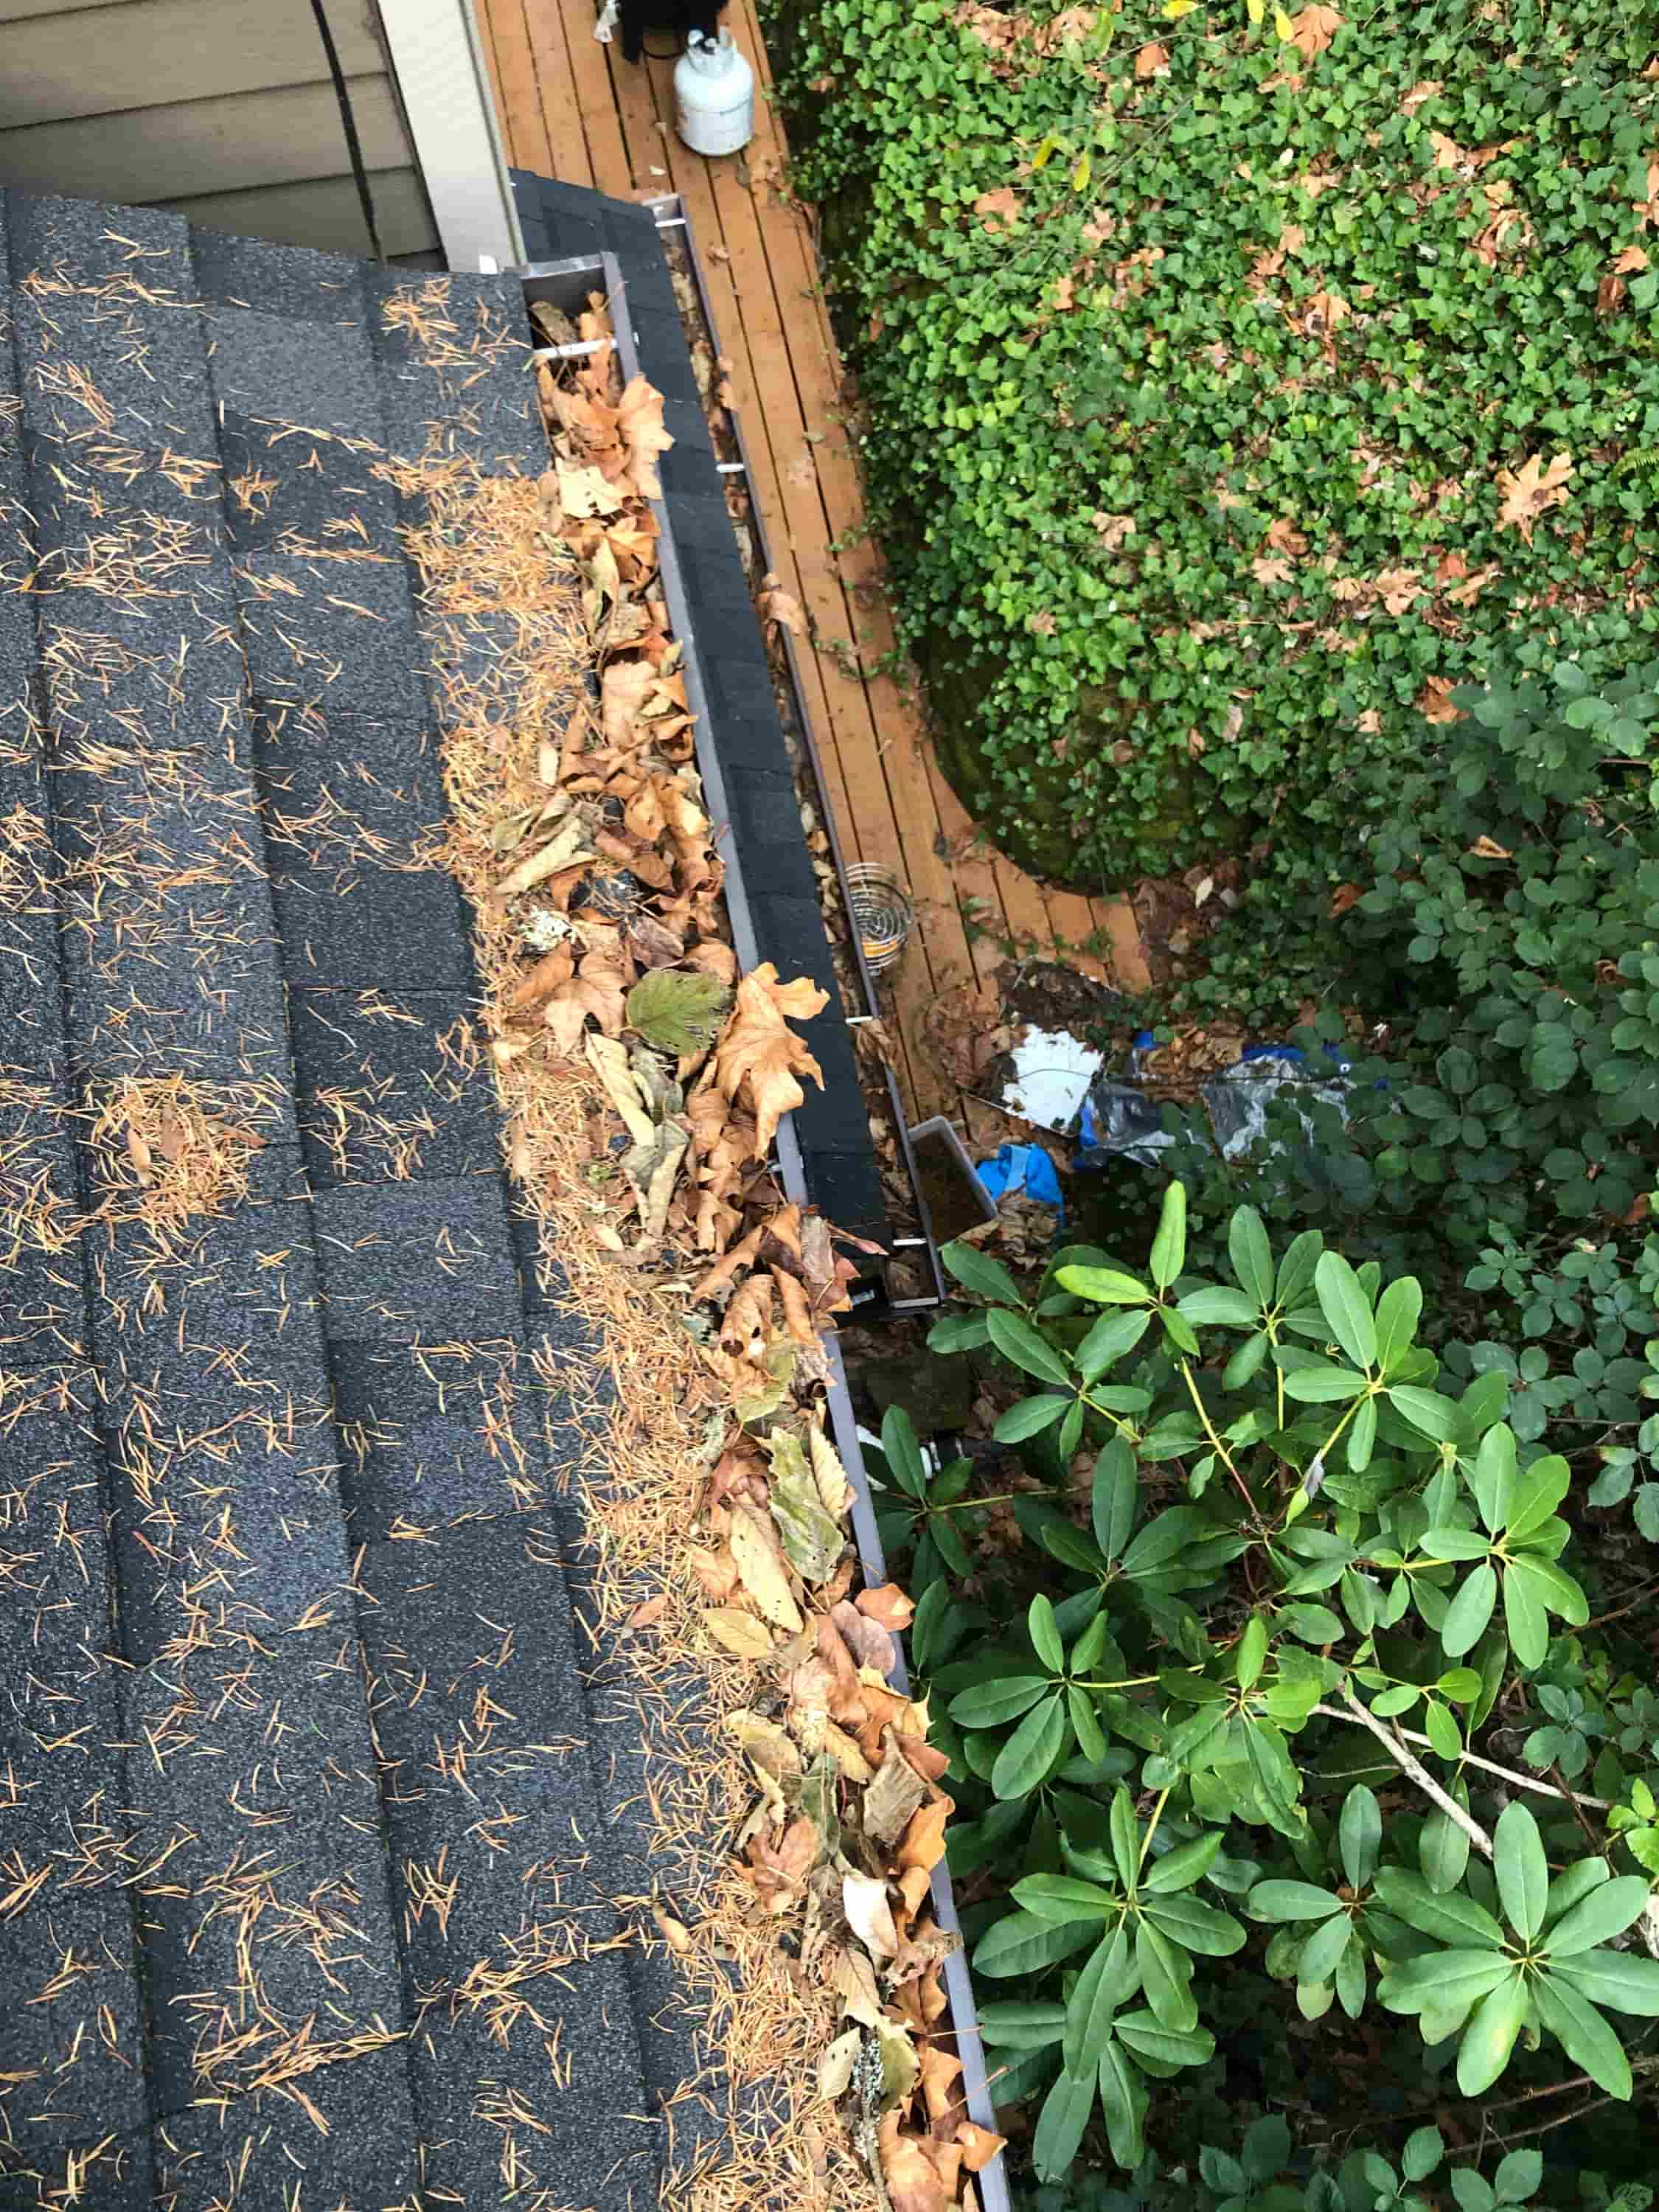 gutter cleaning tools for high roofs